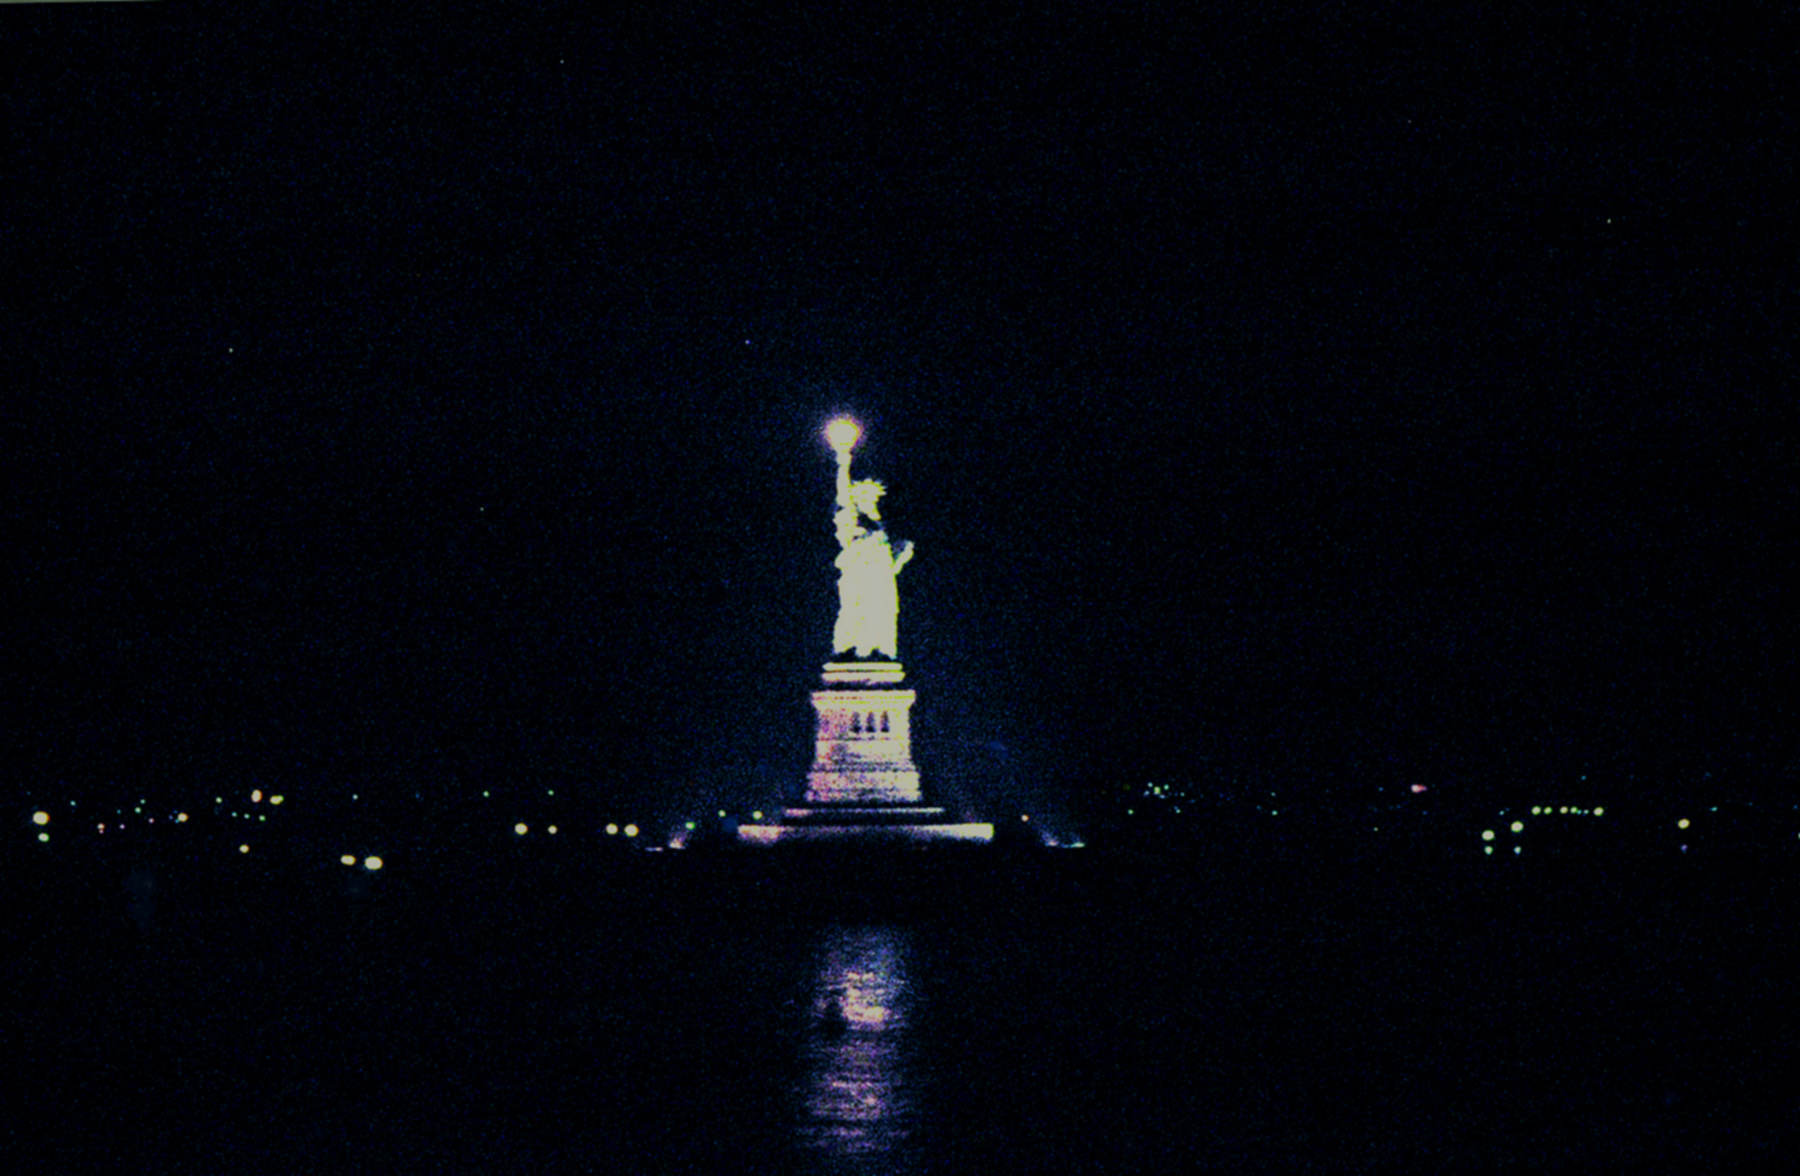 Eclipse 1973 - A15 - Statue of Liberty - 5160